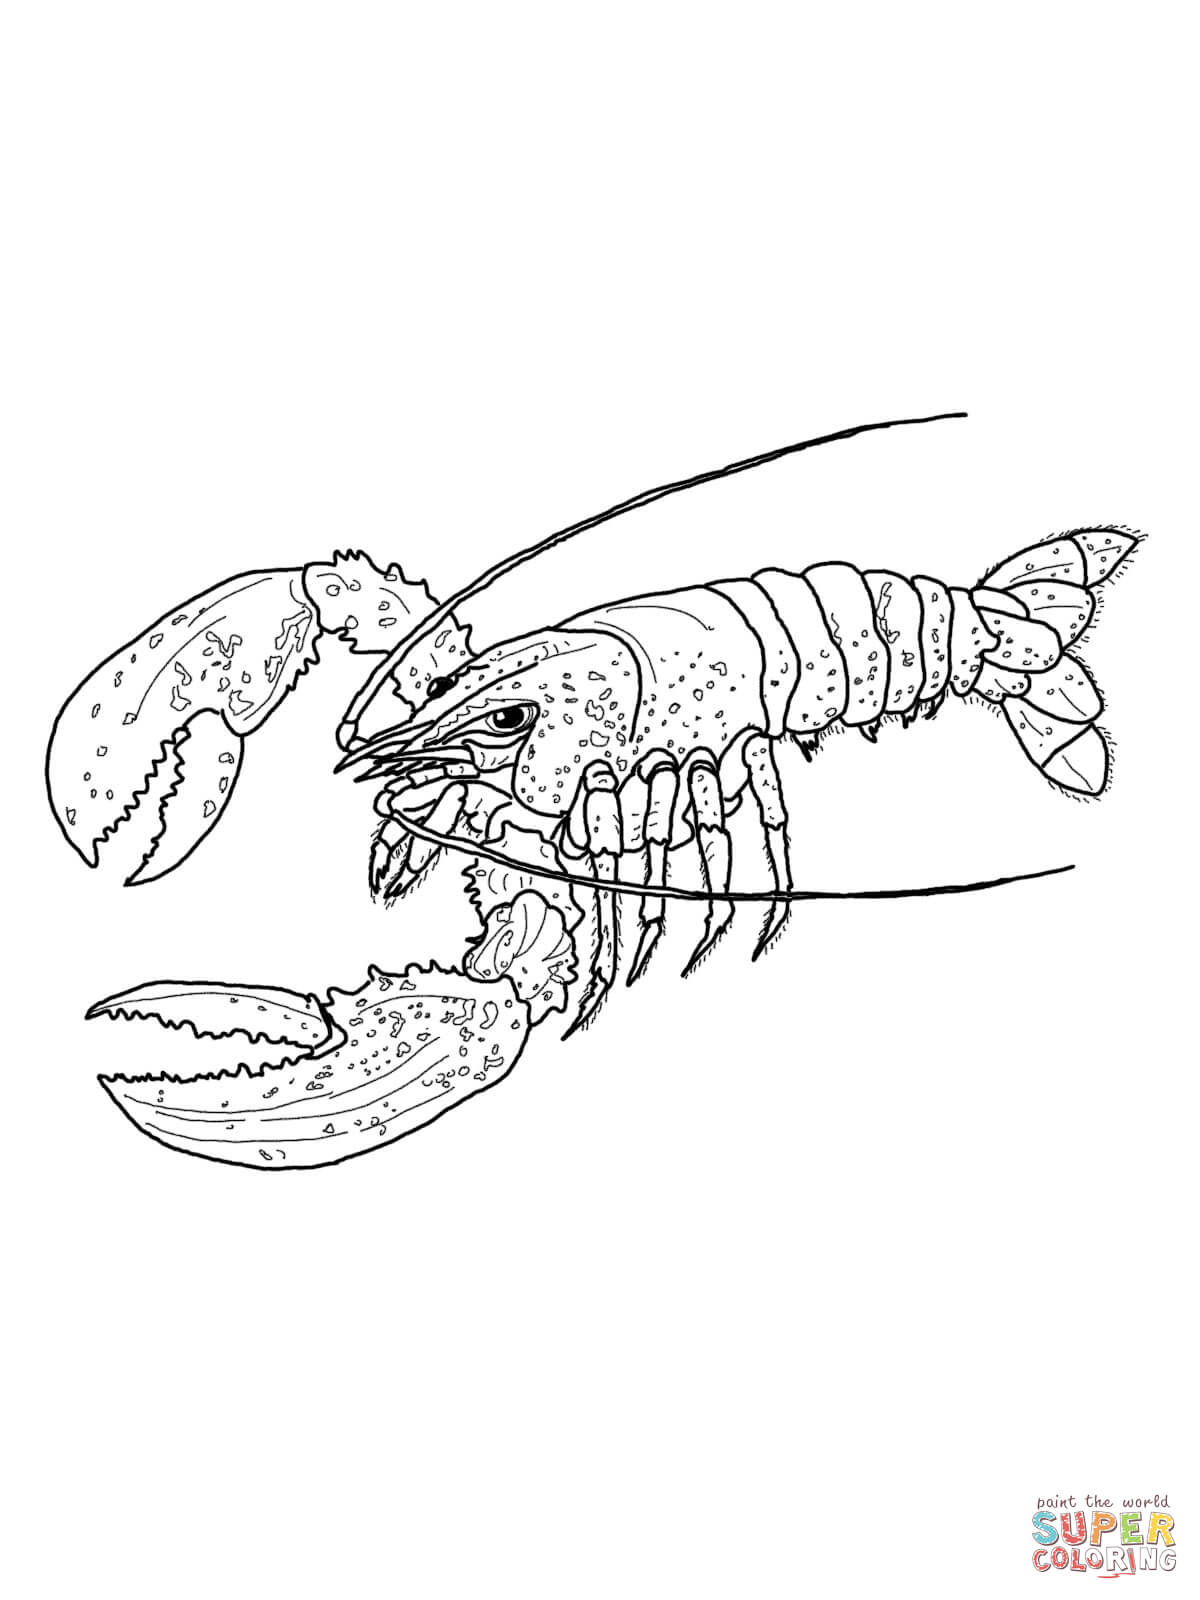 Spiny Lobster coloring #15, Download drawings